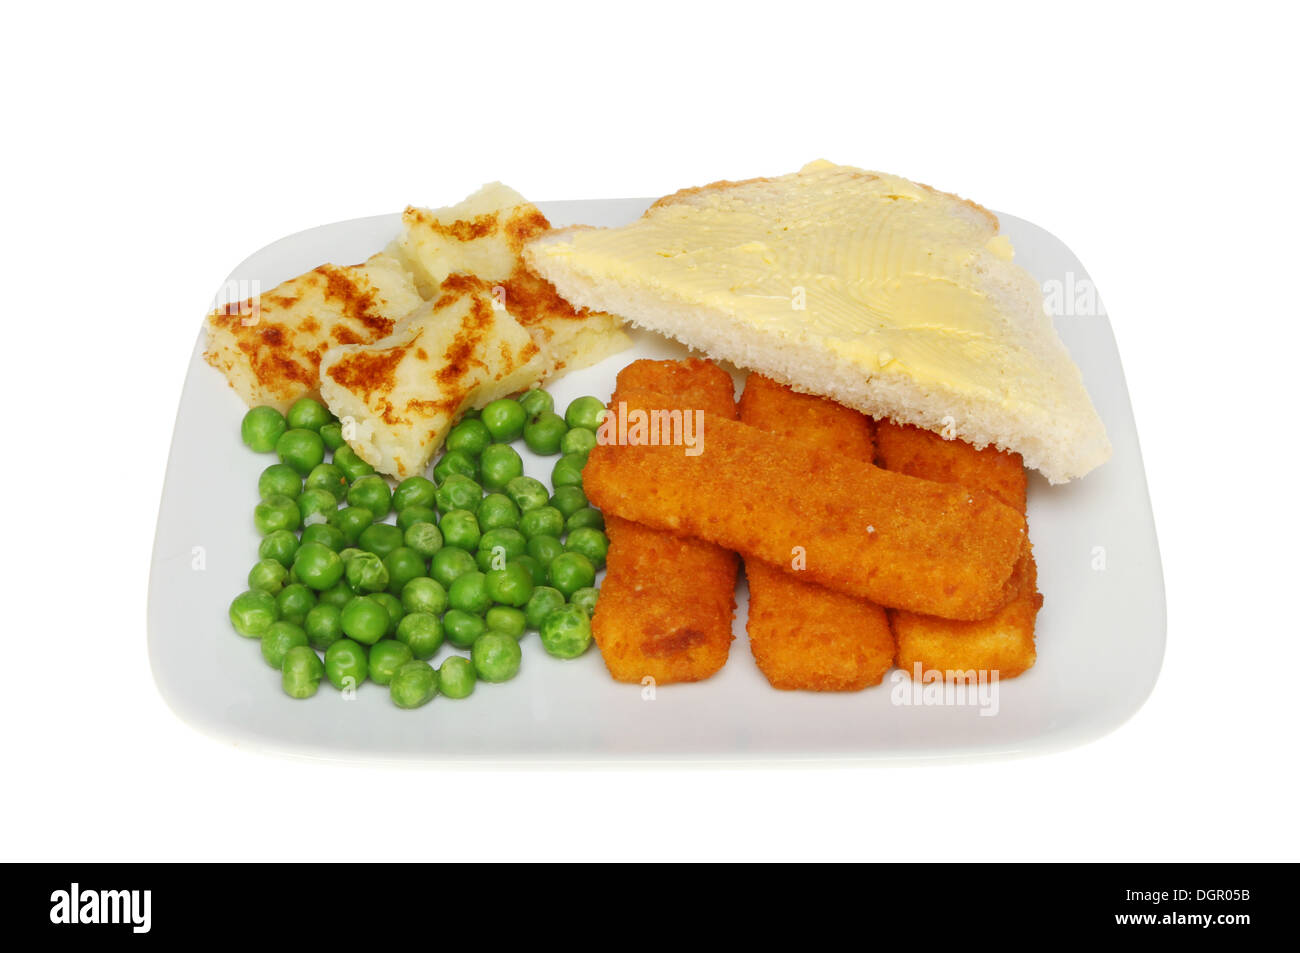 Child's meal of fish fingers peas and potato cakes with bread and